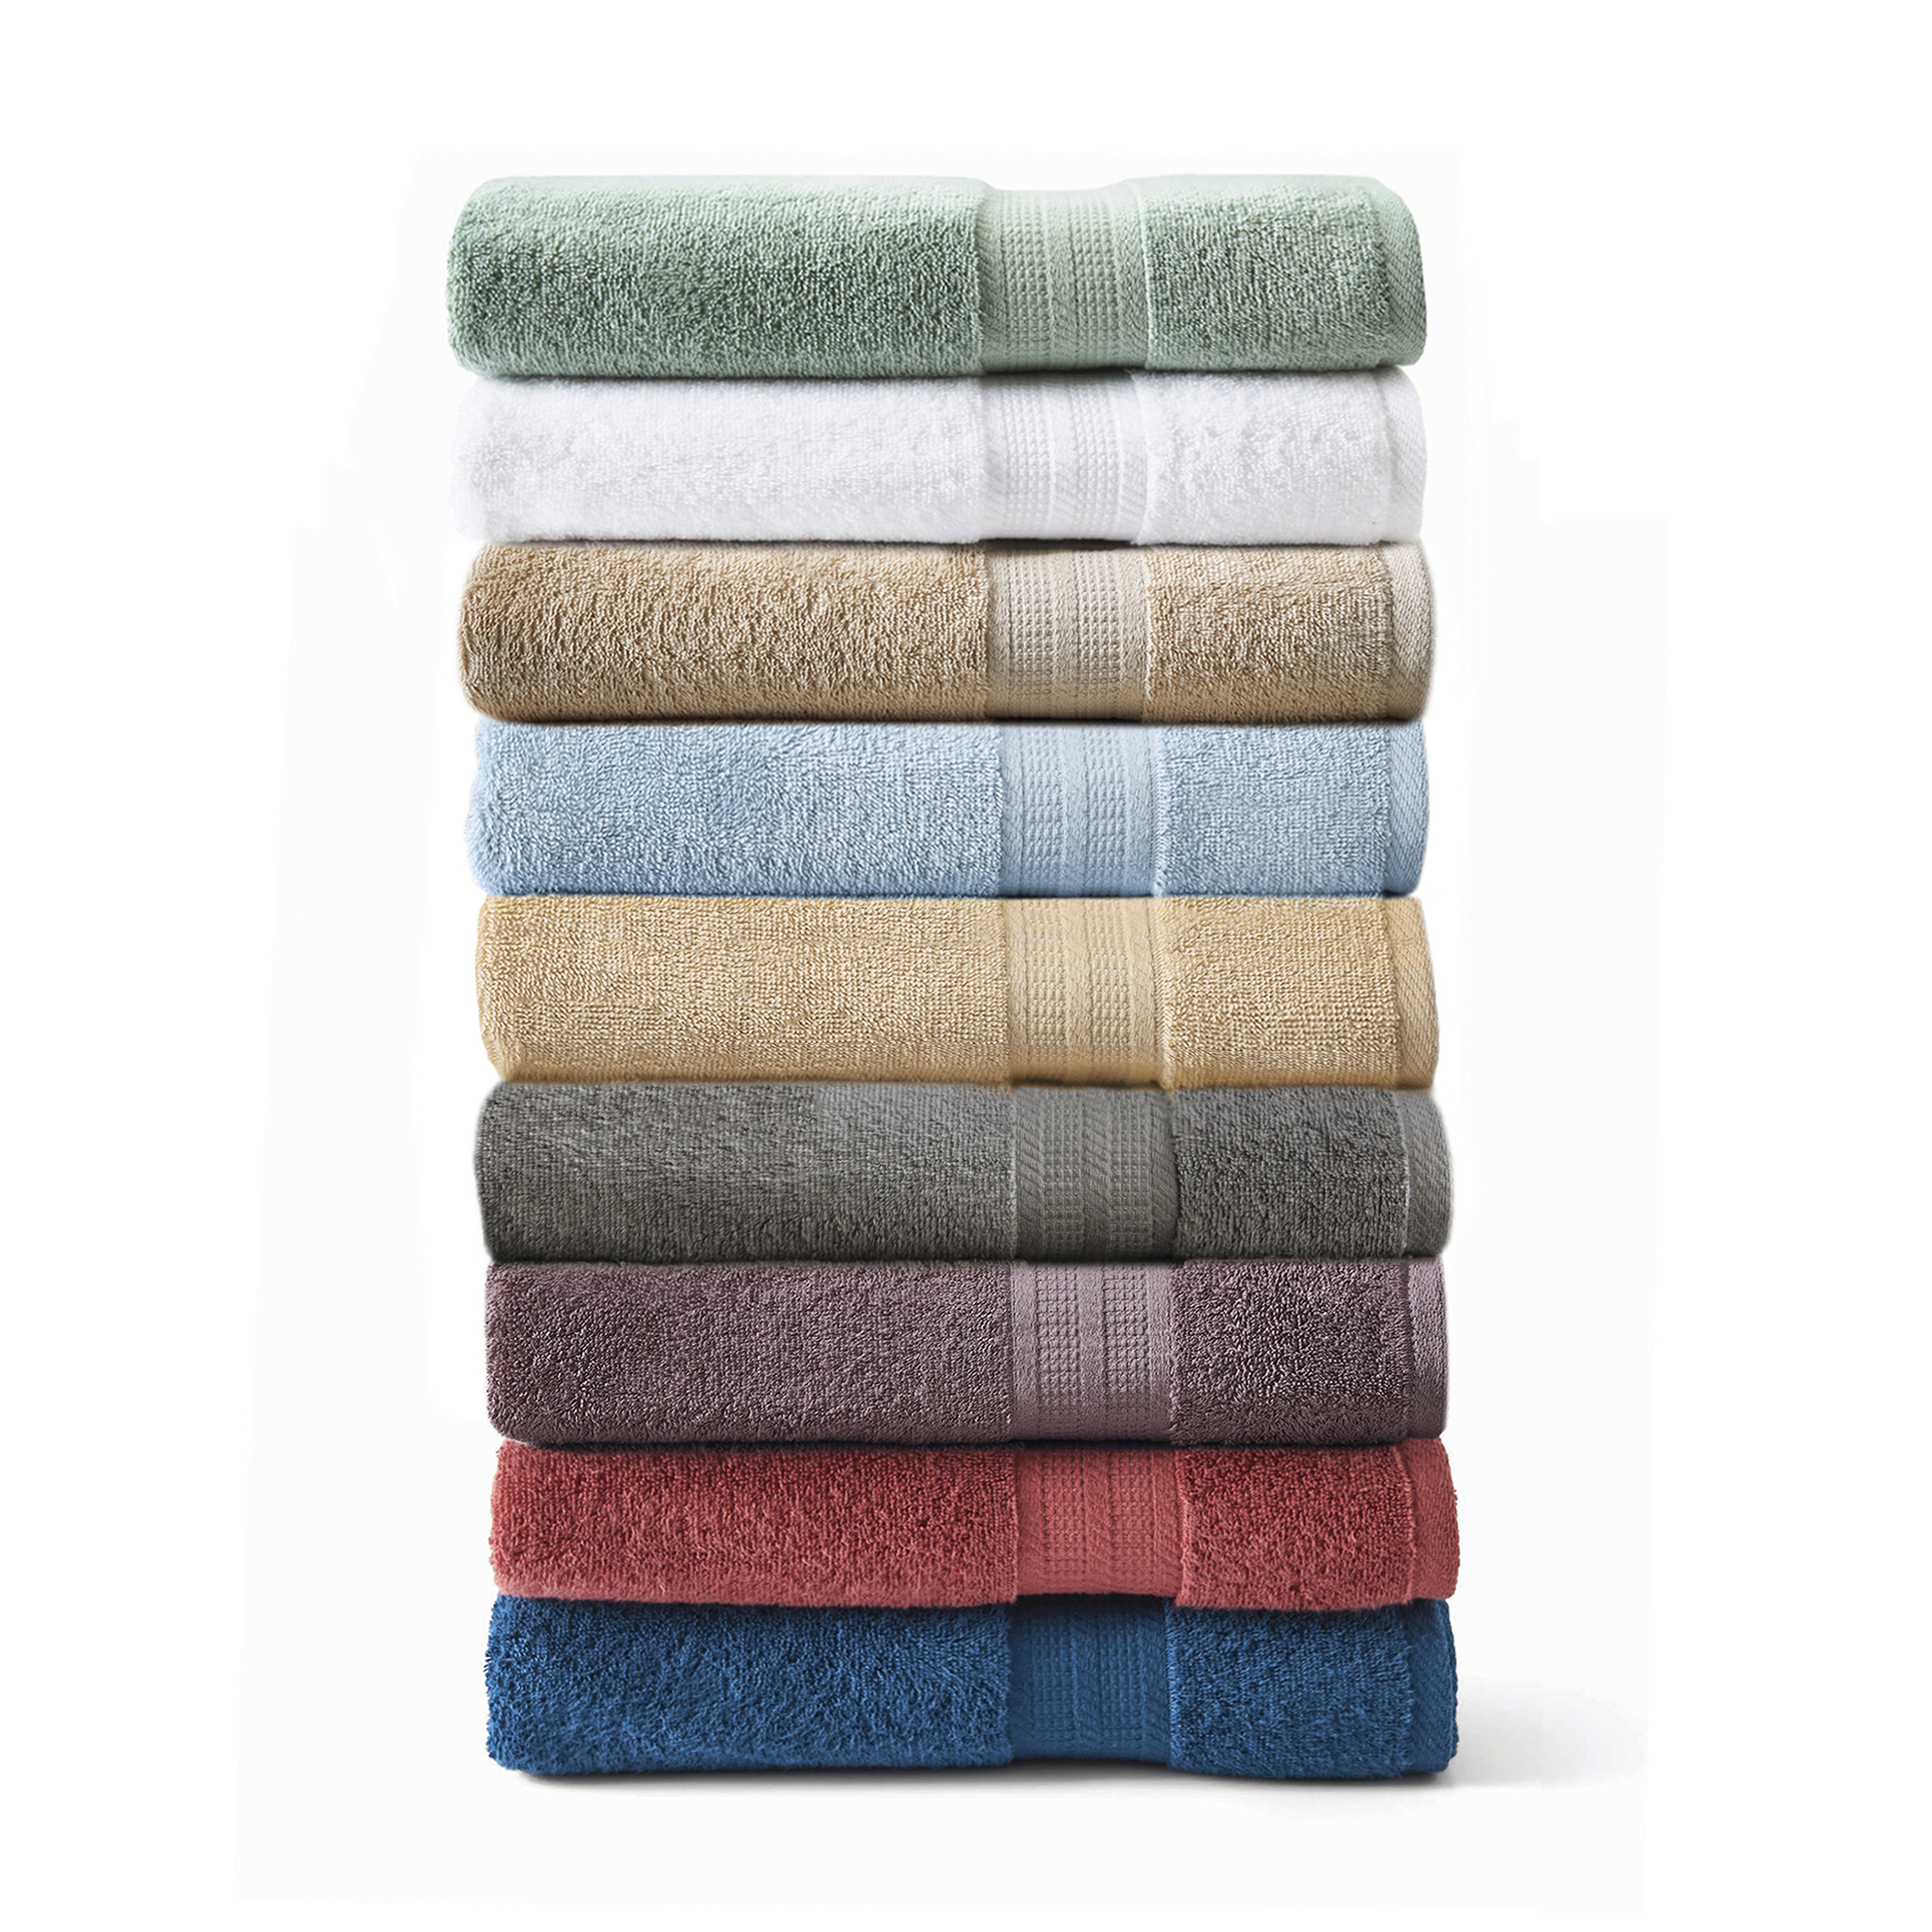 Better Homes & Gardens Adult Bath Towel, Solid Grey - image 3 of 9